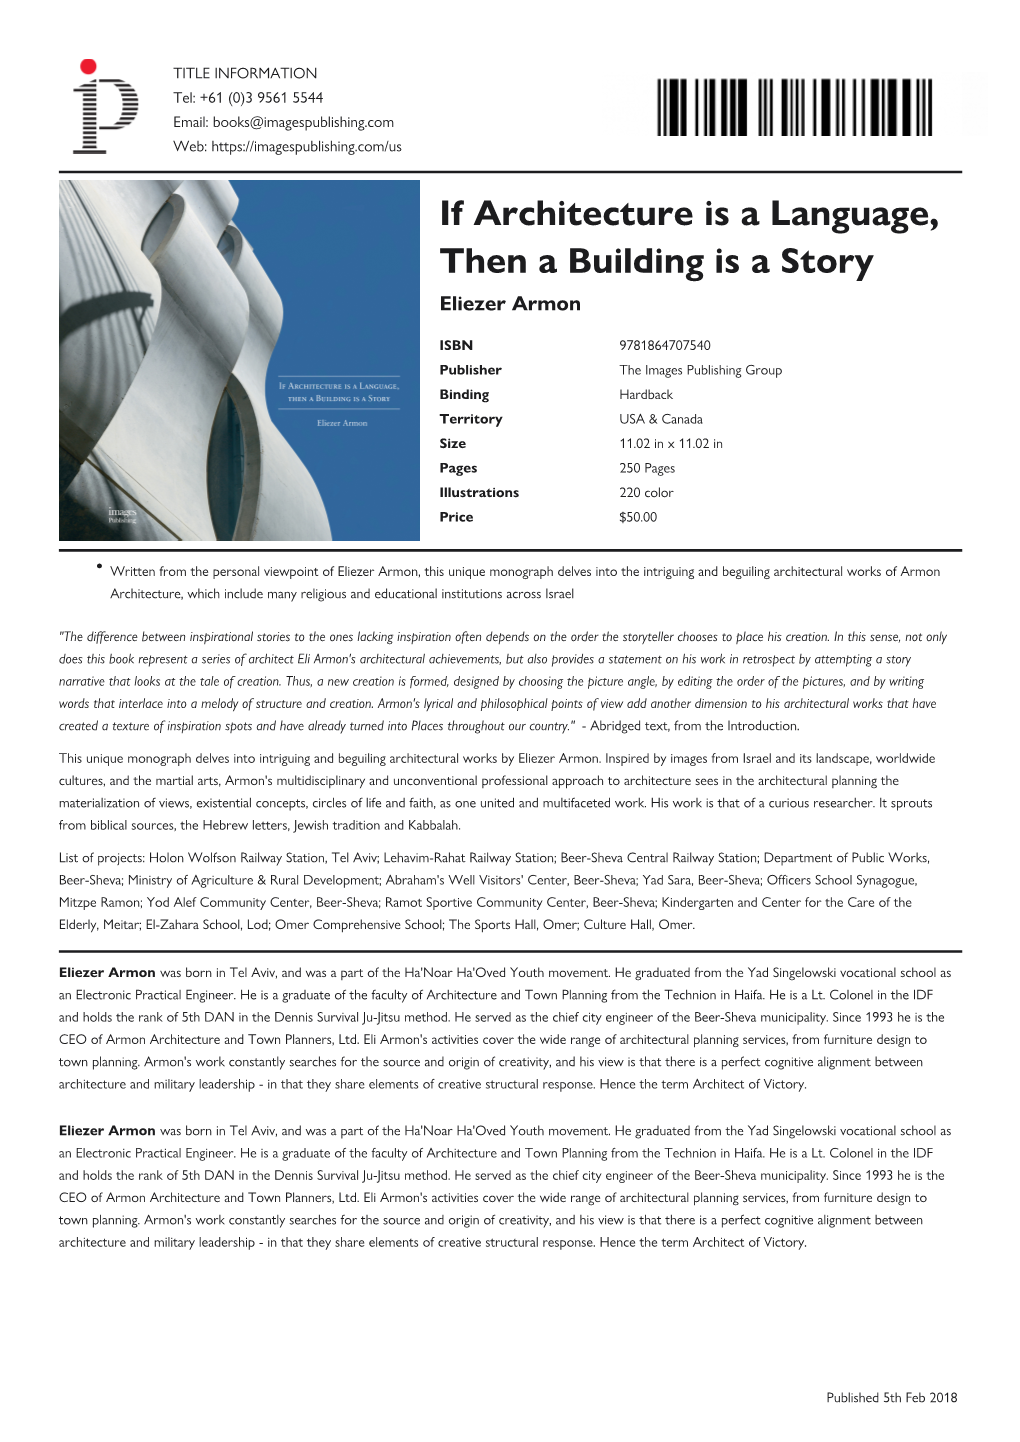 If Architecture Is a Language, Then a Building Is a Story Datasheet